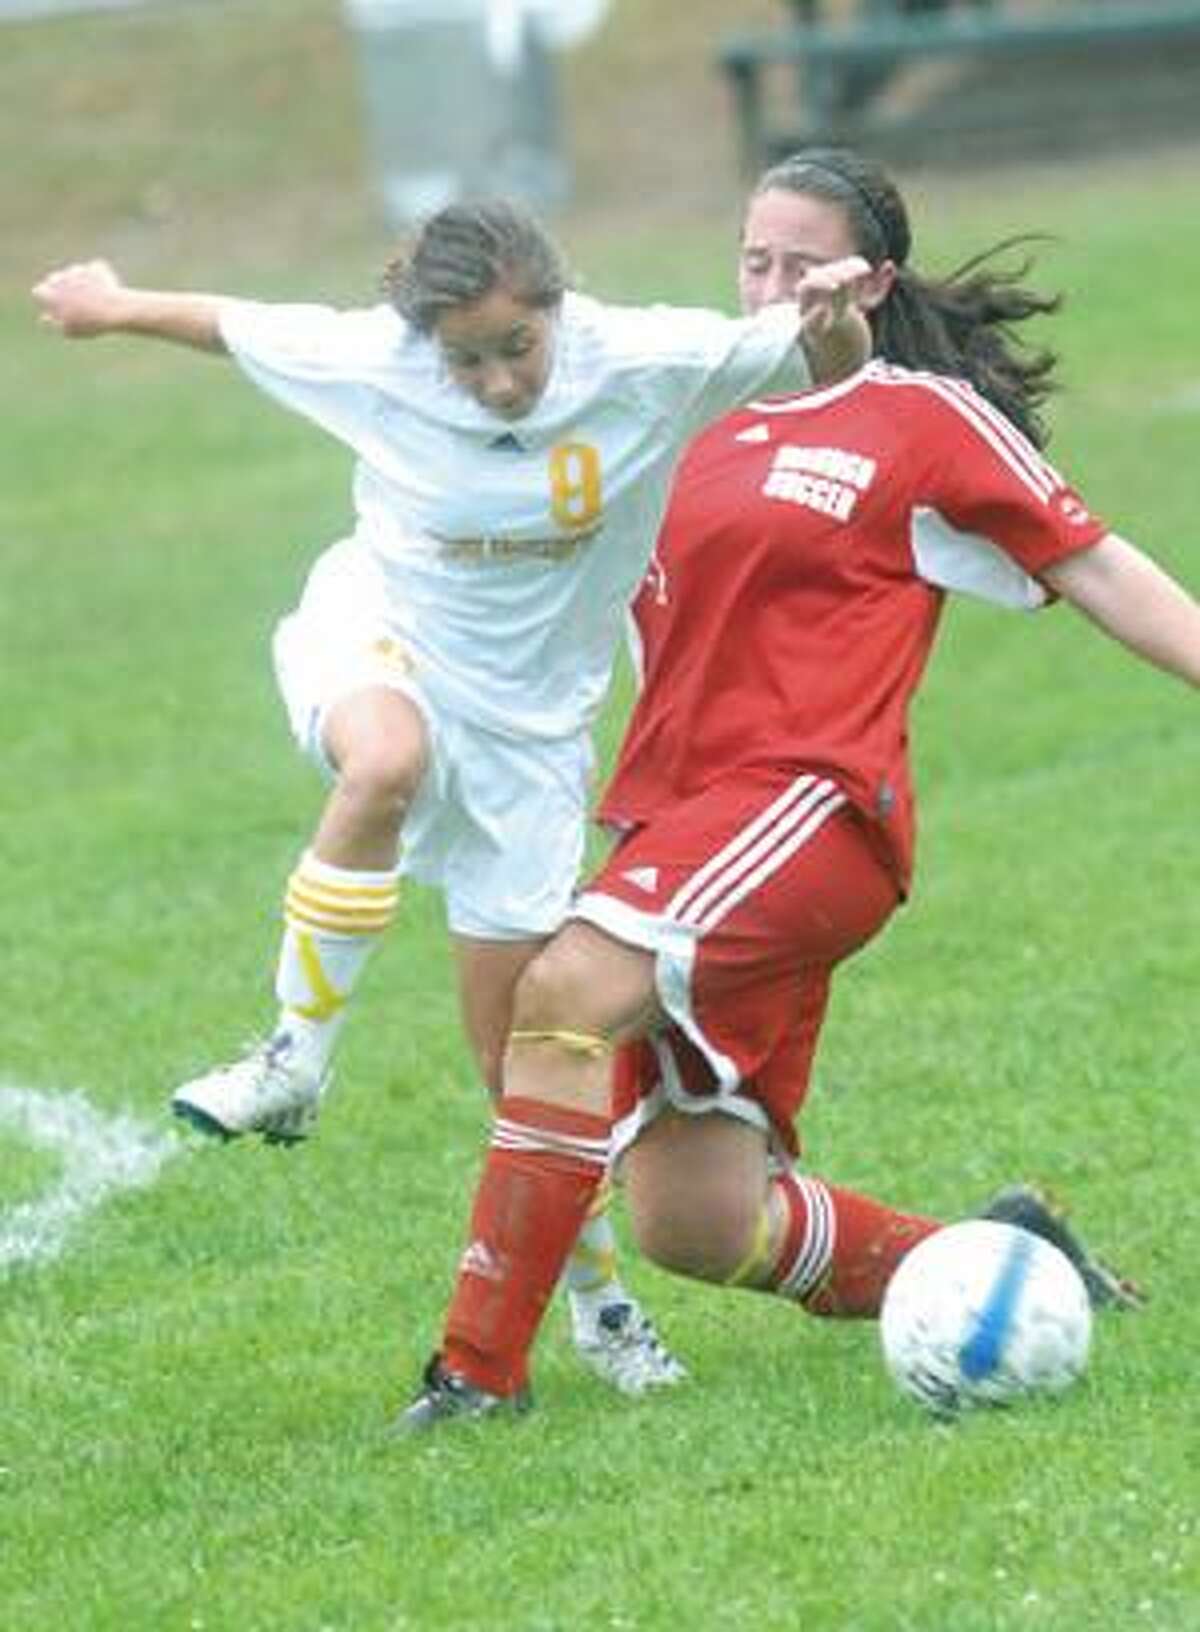 MIC NICOSIA/Register Citizen Gilbert's Courtney Hoxie, left, and Wamogo's Jamie Squiers mix it up during Thursday's game in Winsted. Gilbert won 3-0. Purchase a glossy print of this photo and more at www.registercitizen.com.